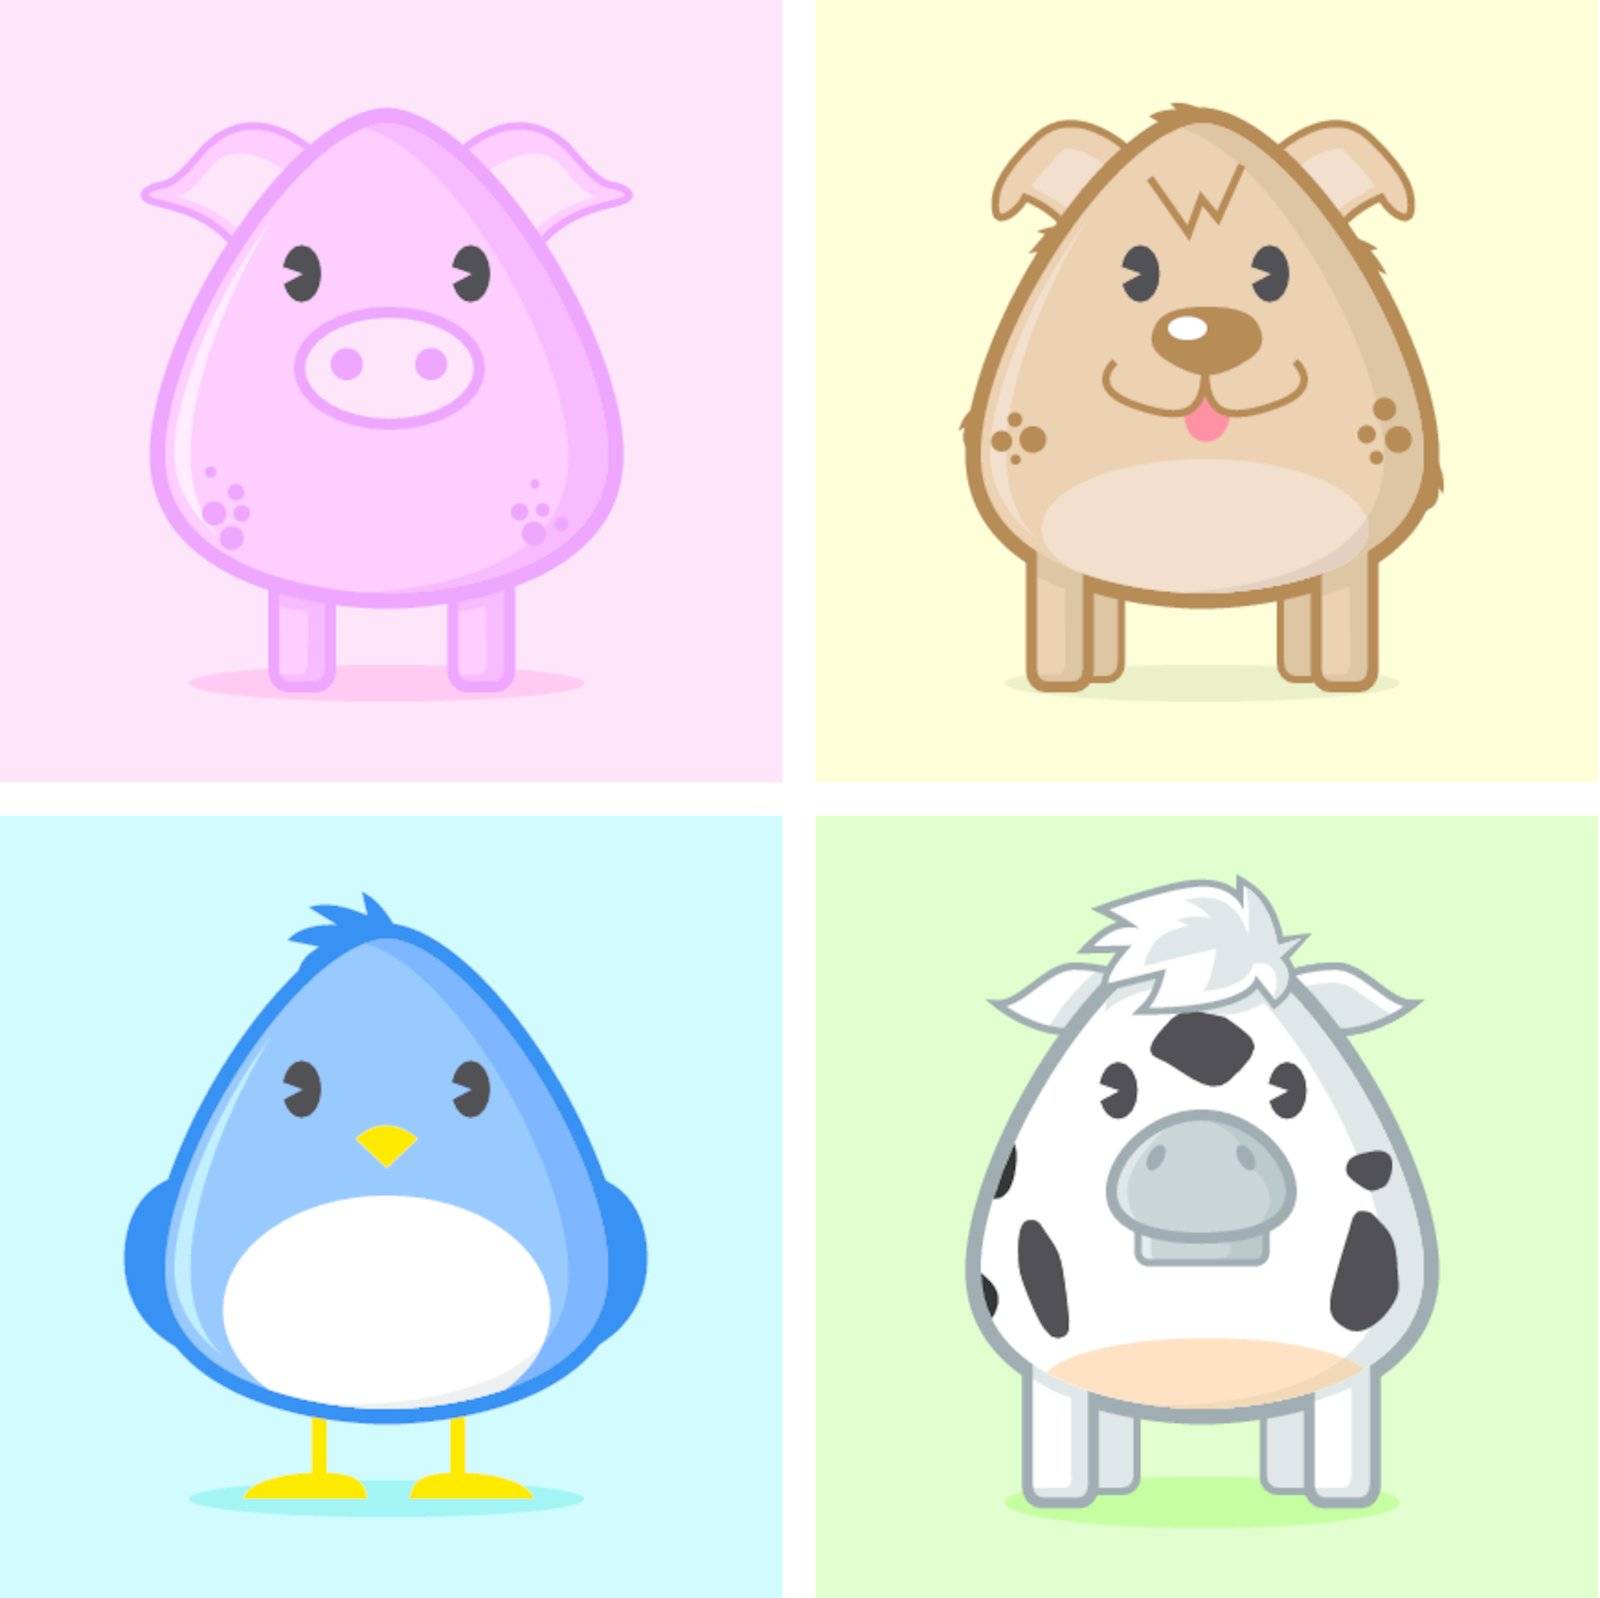 Image of animal (pig, puppy, bird, cow) in caricature cartoon style with soft and cute color on nice colored background. See my portfolio to see other cute animals